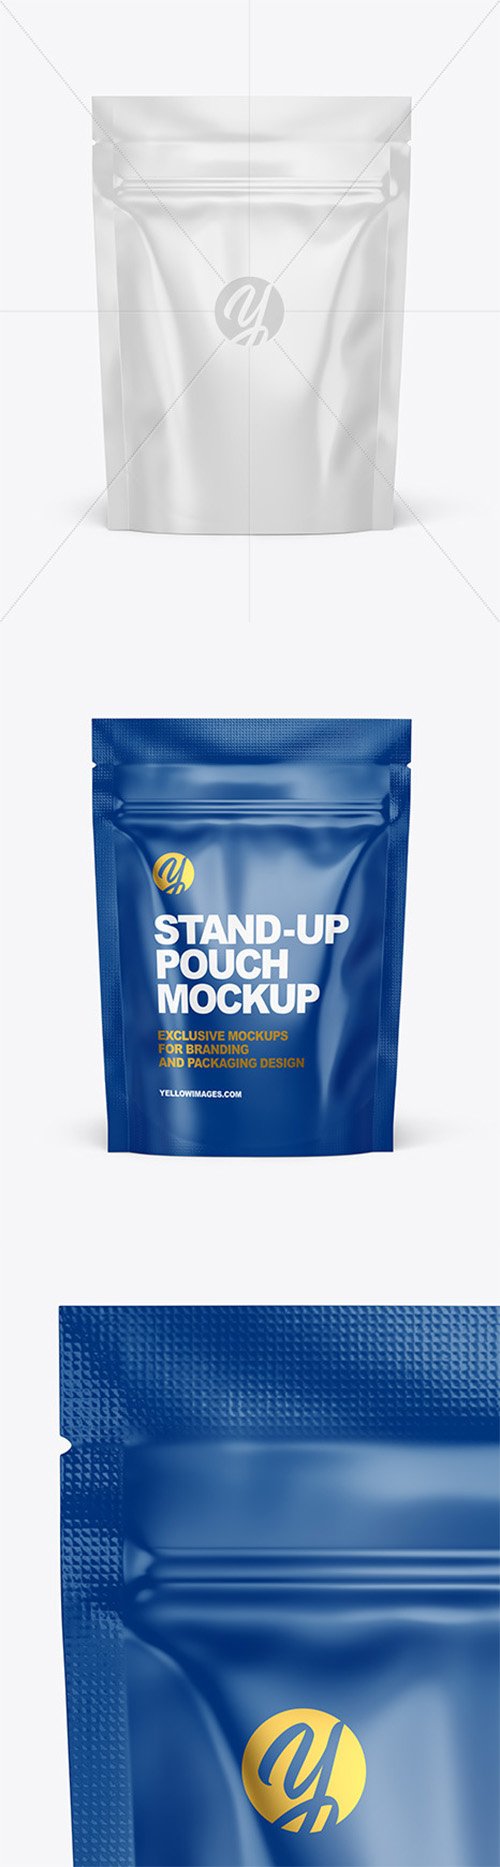 Glossy Stand-up Pouch Mockup 57498 TIF